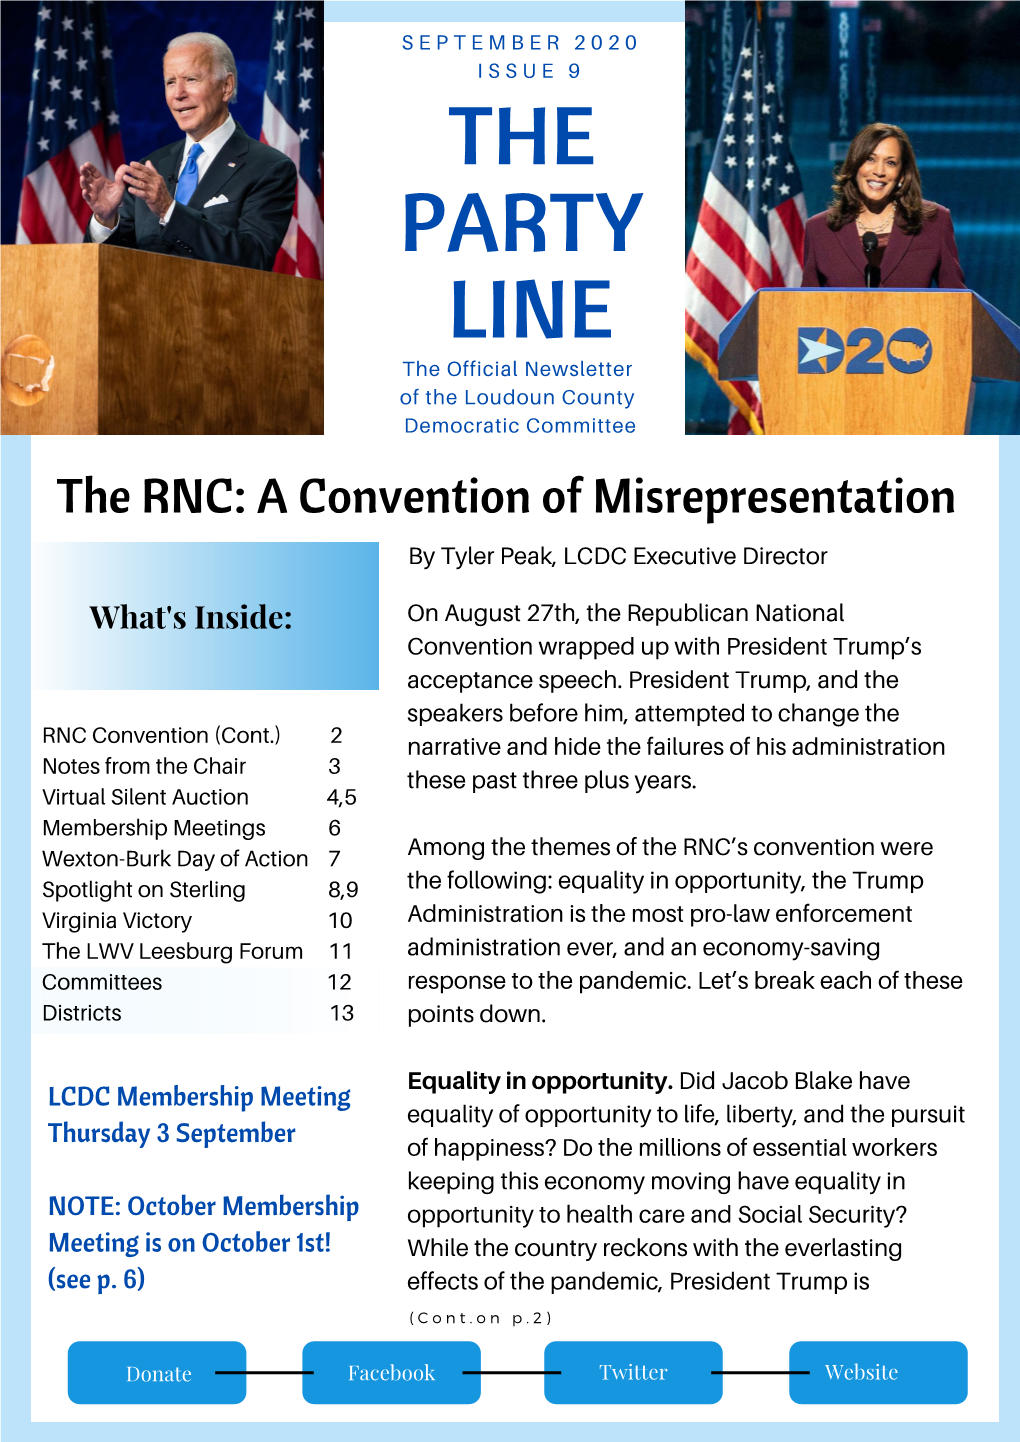 THE PARTY LINE the Official Newsletter of the Loudoun County Democratic Committee the RNC: a Convention of Misrepresentation by Tyler Peak, LCDC Executive Director